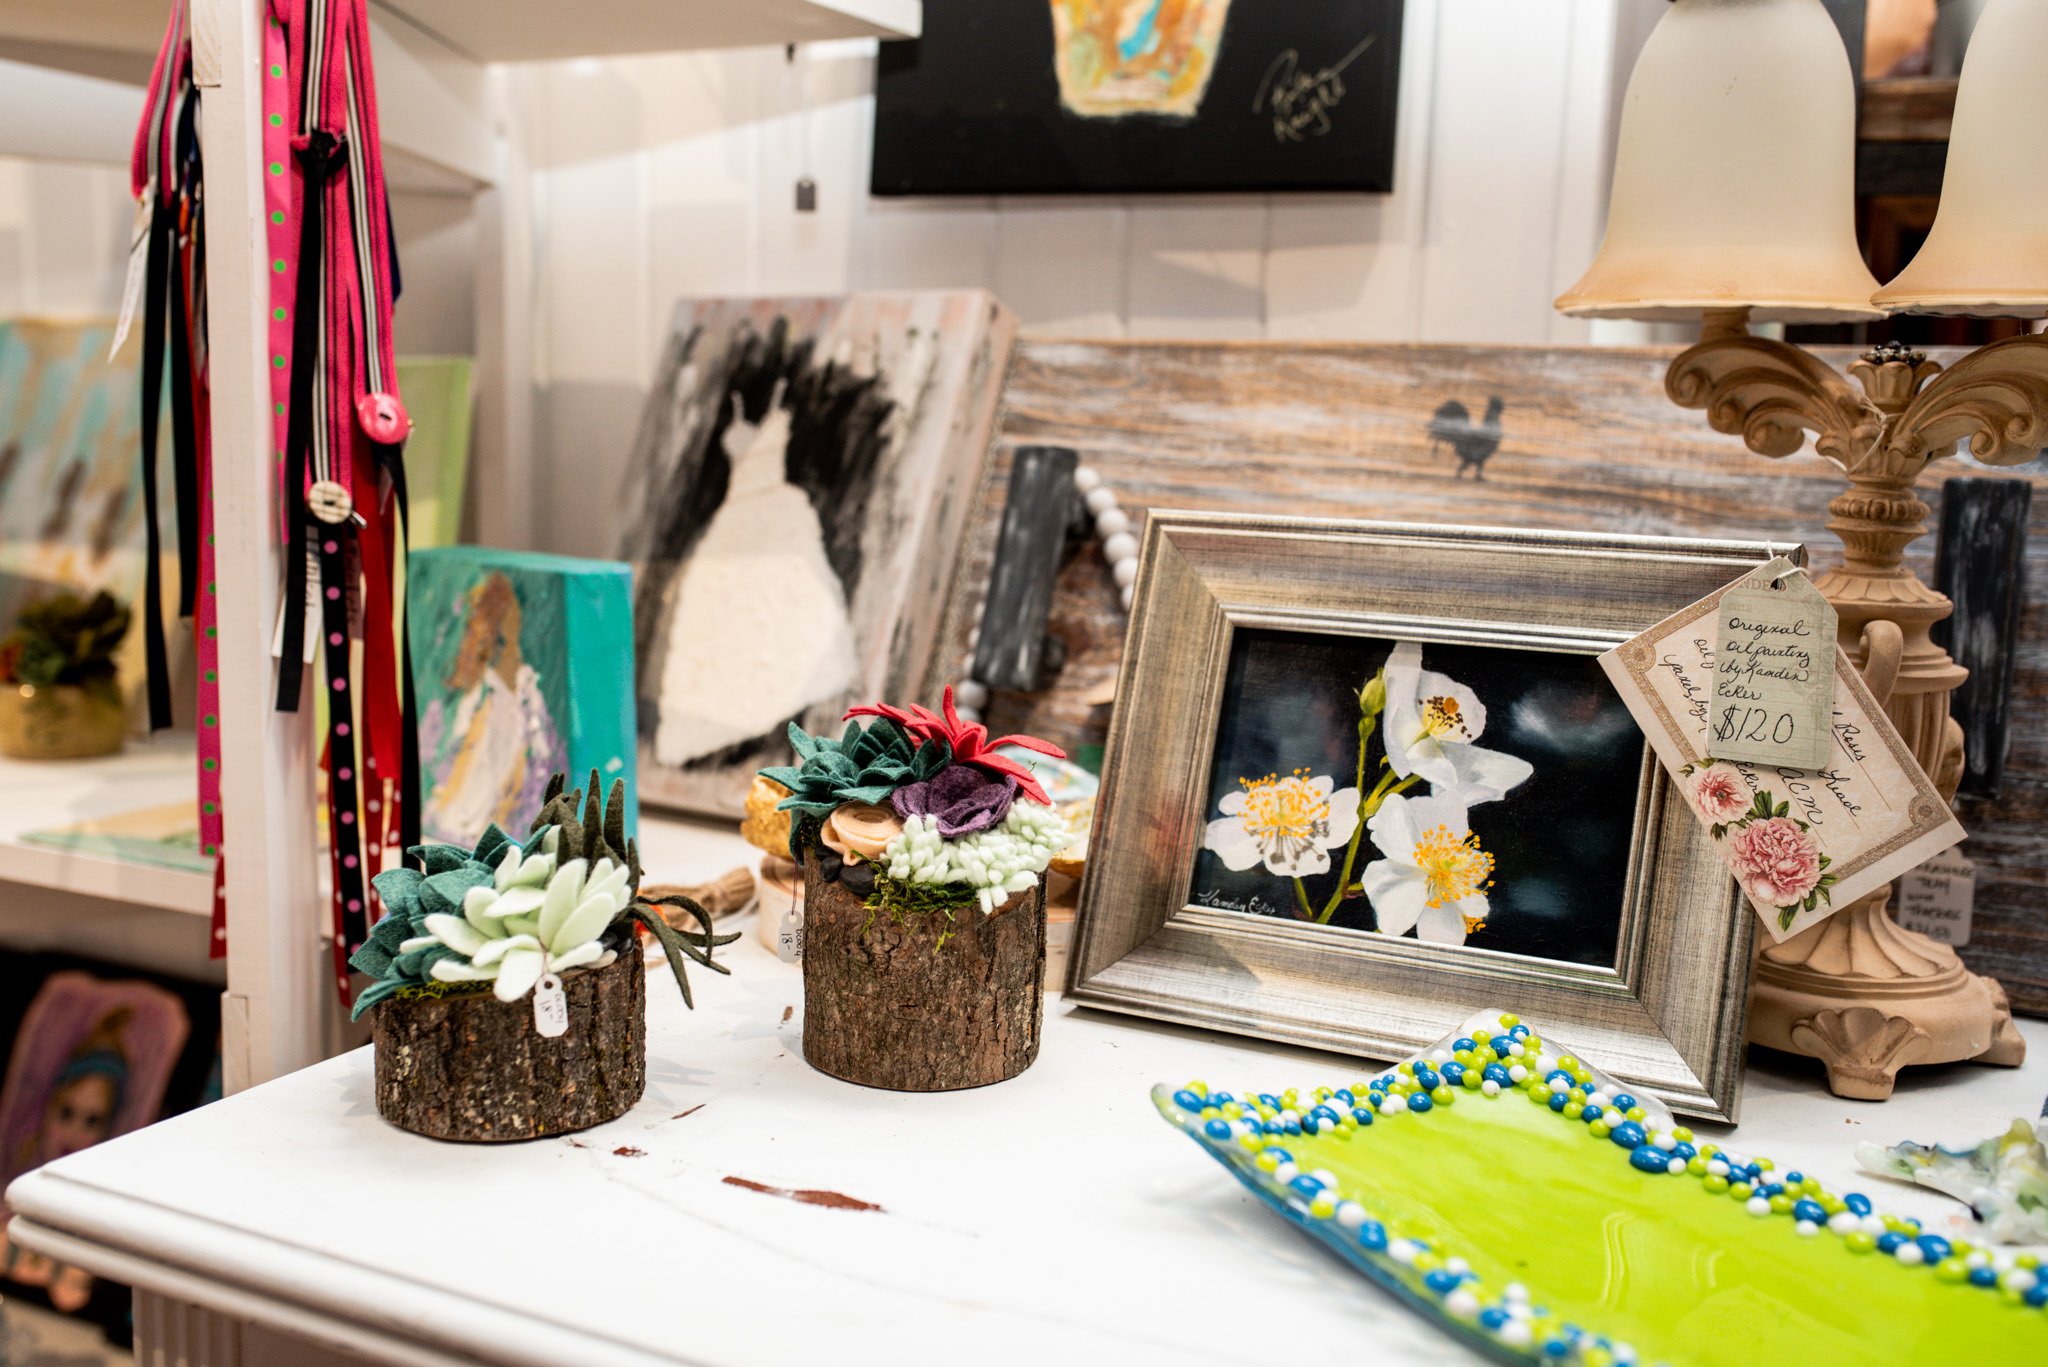 Paintings and Crafts for purchase at the Center for the Arts